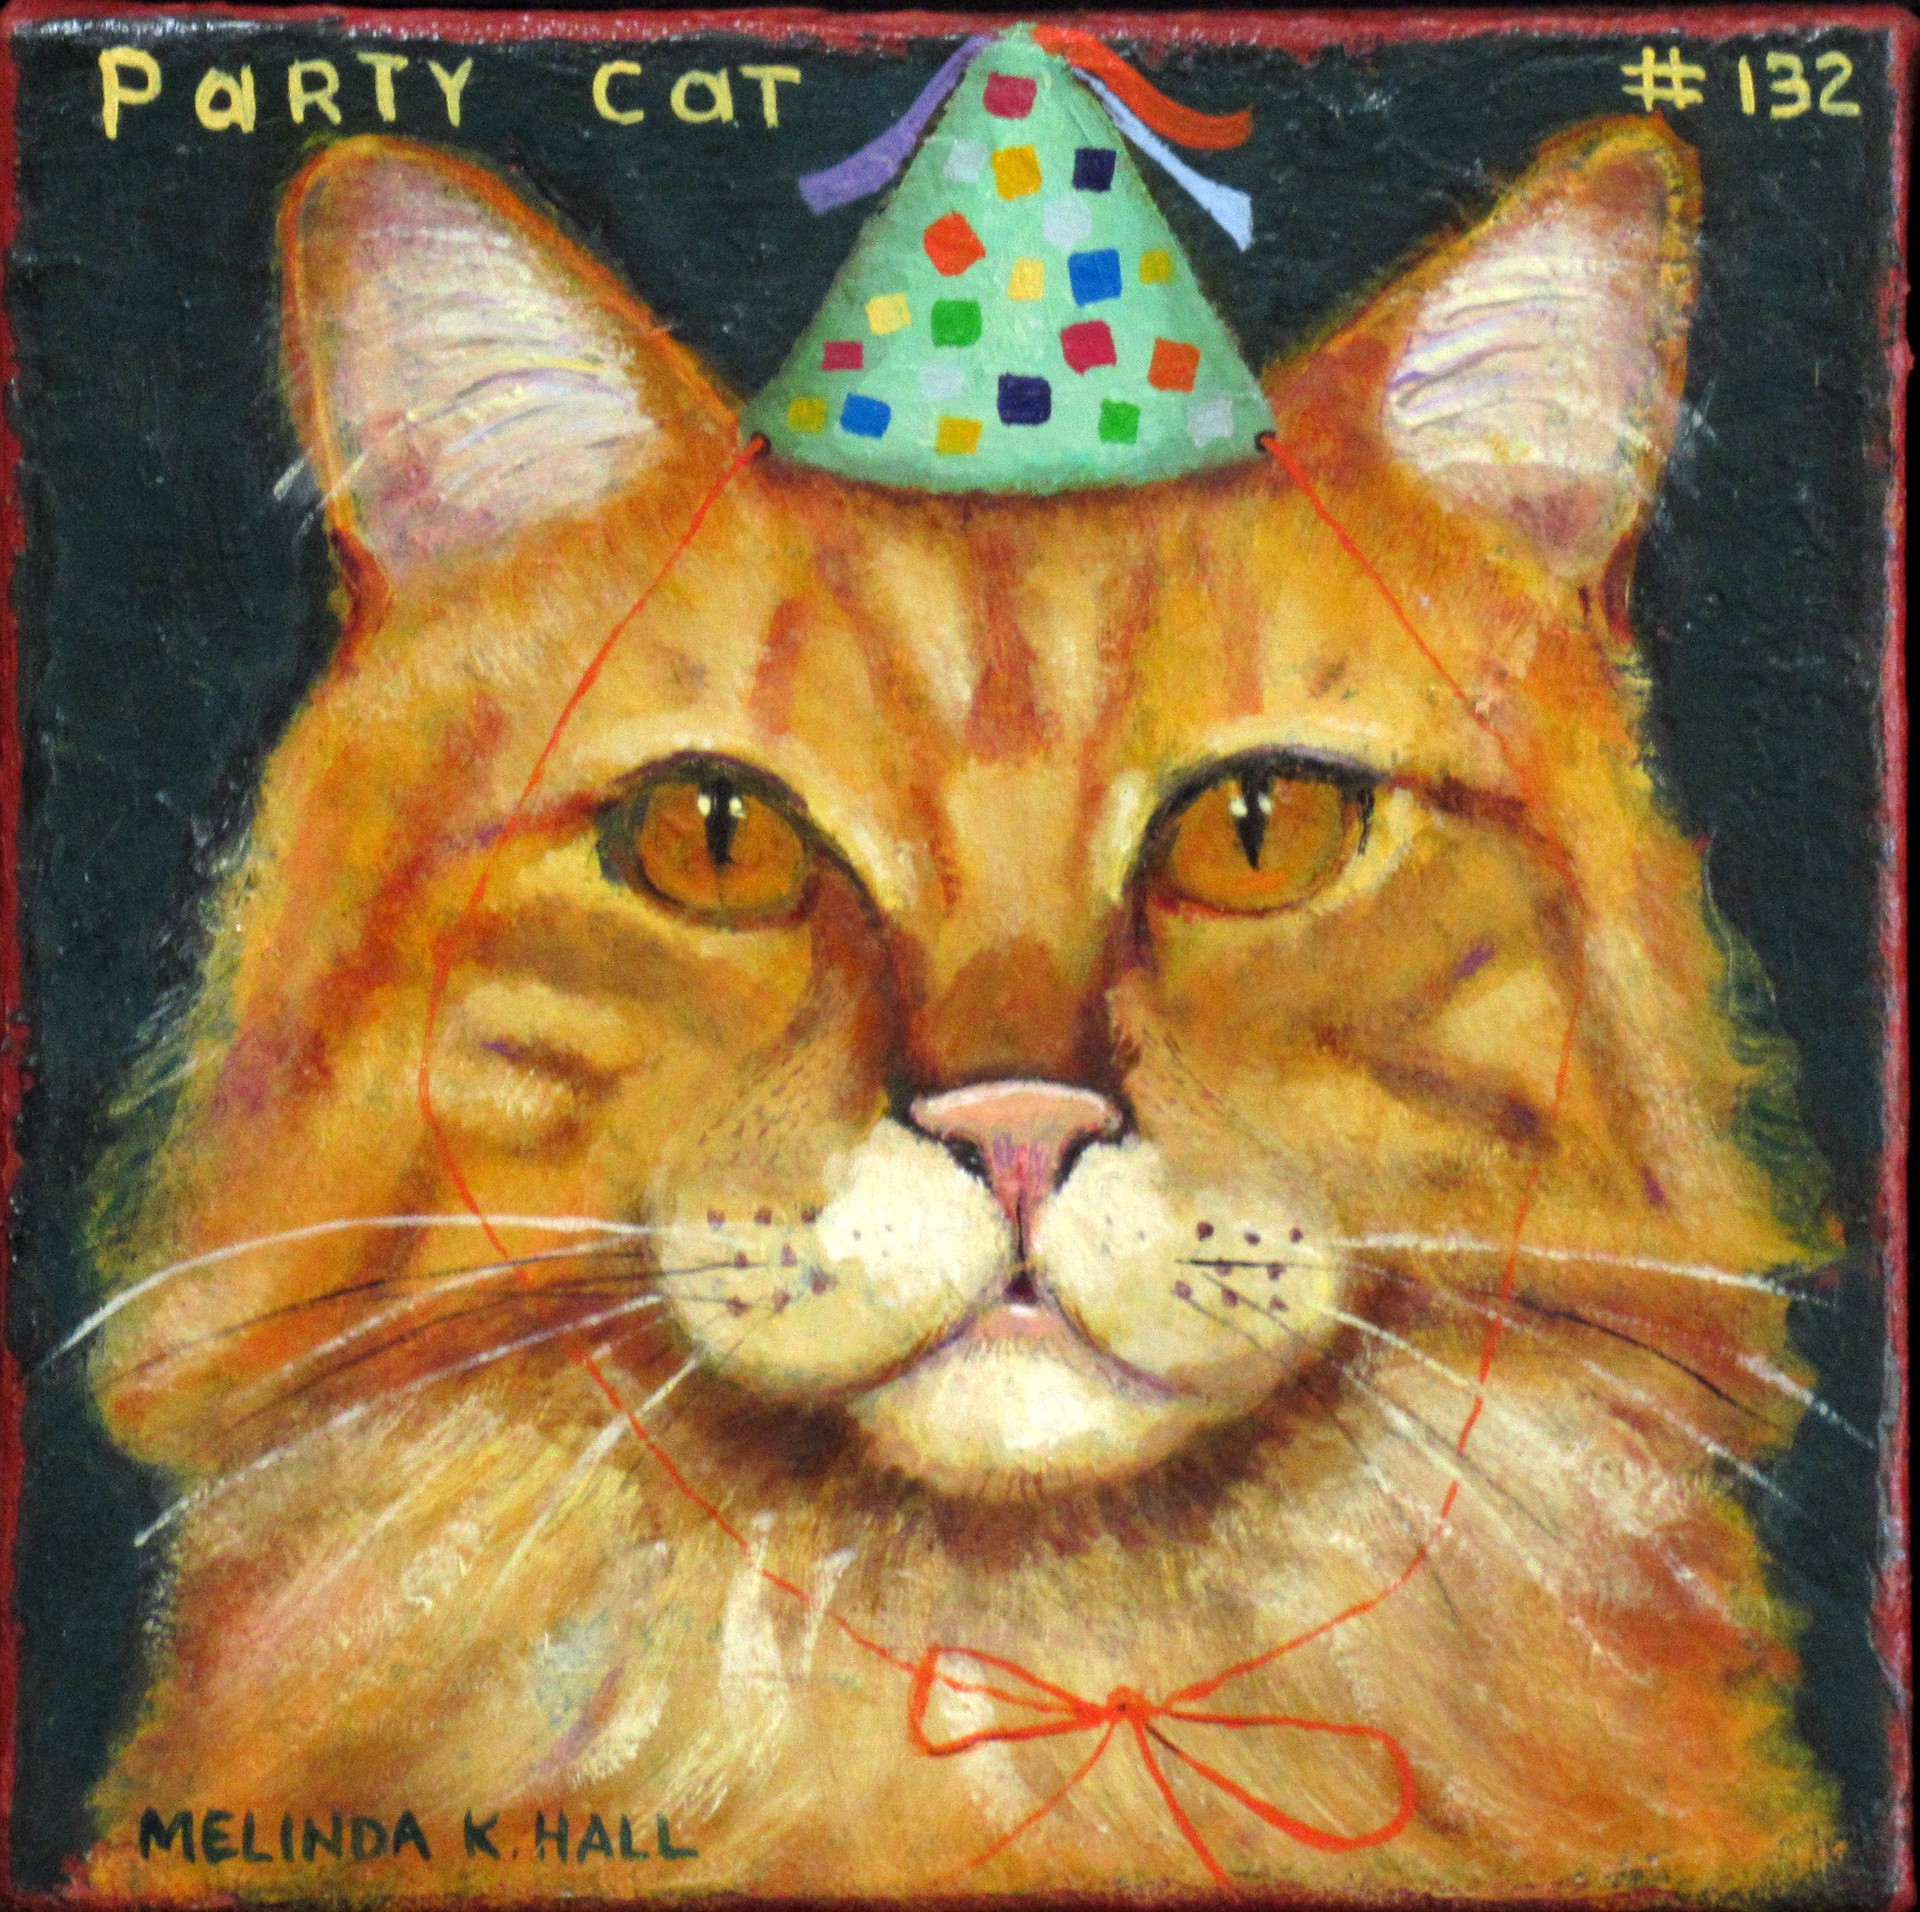 Party Cat #132 by Melinda K. Hall